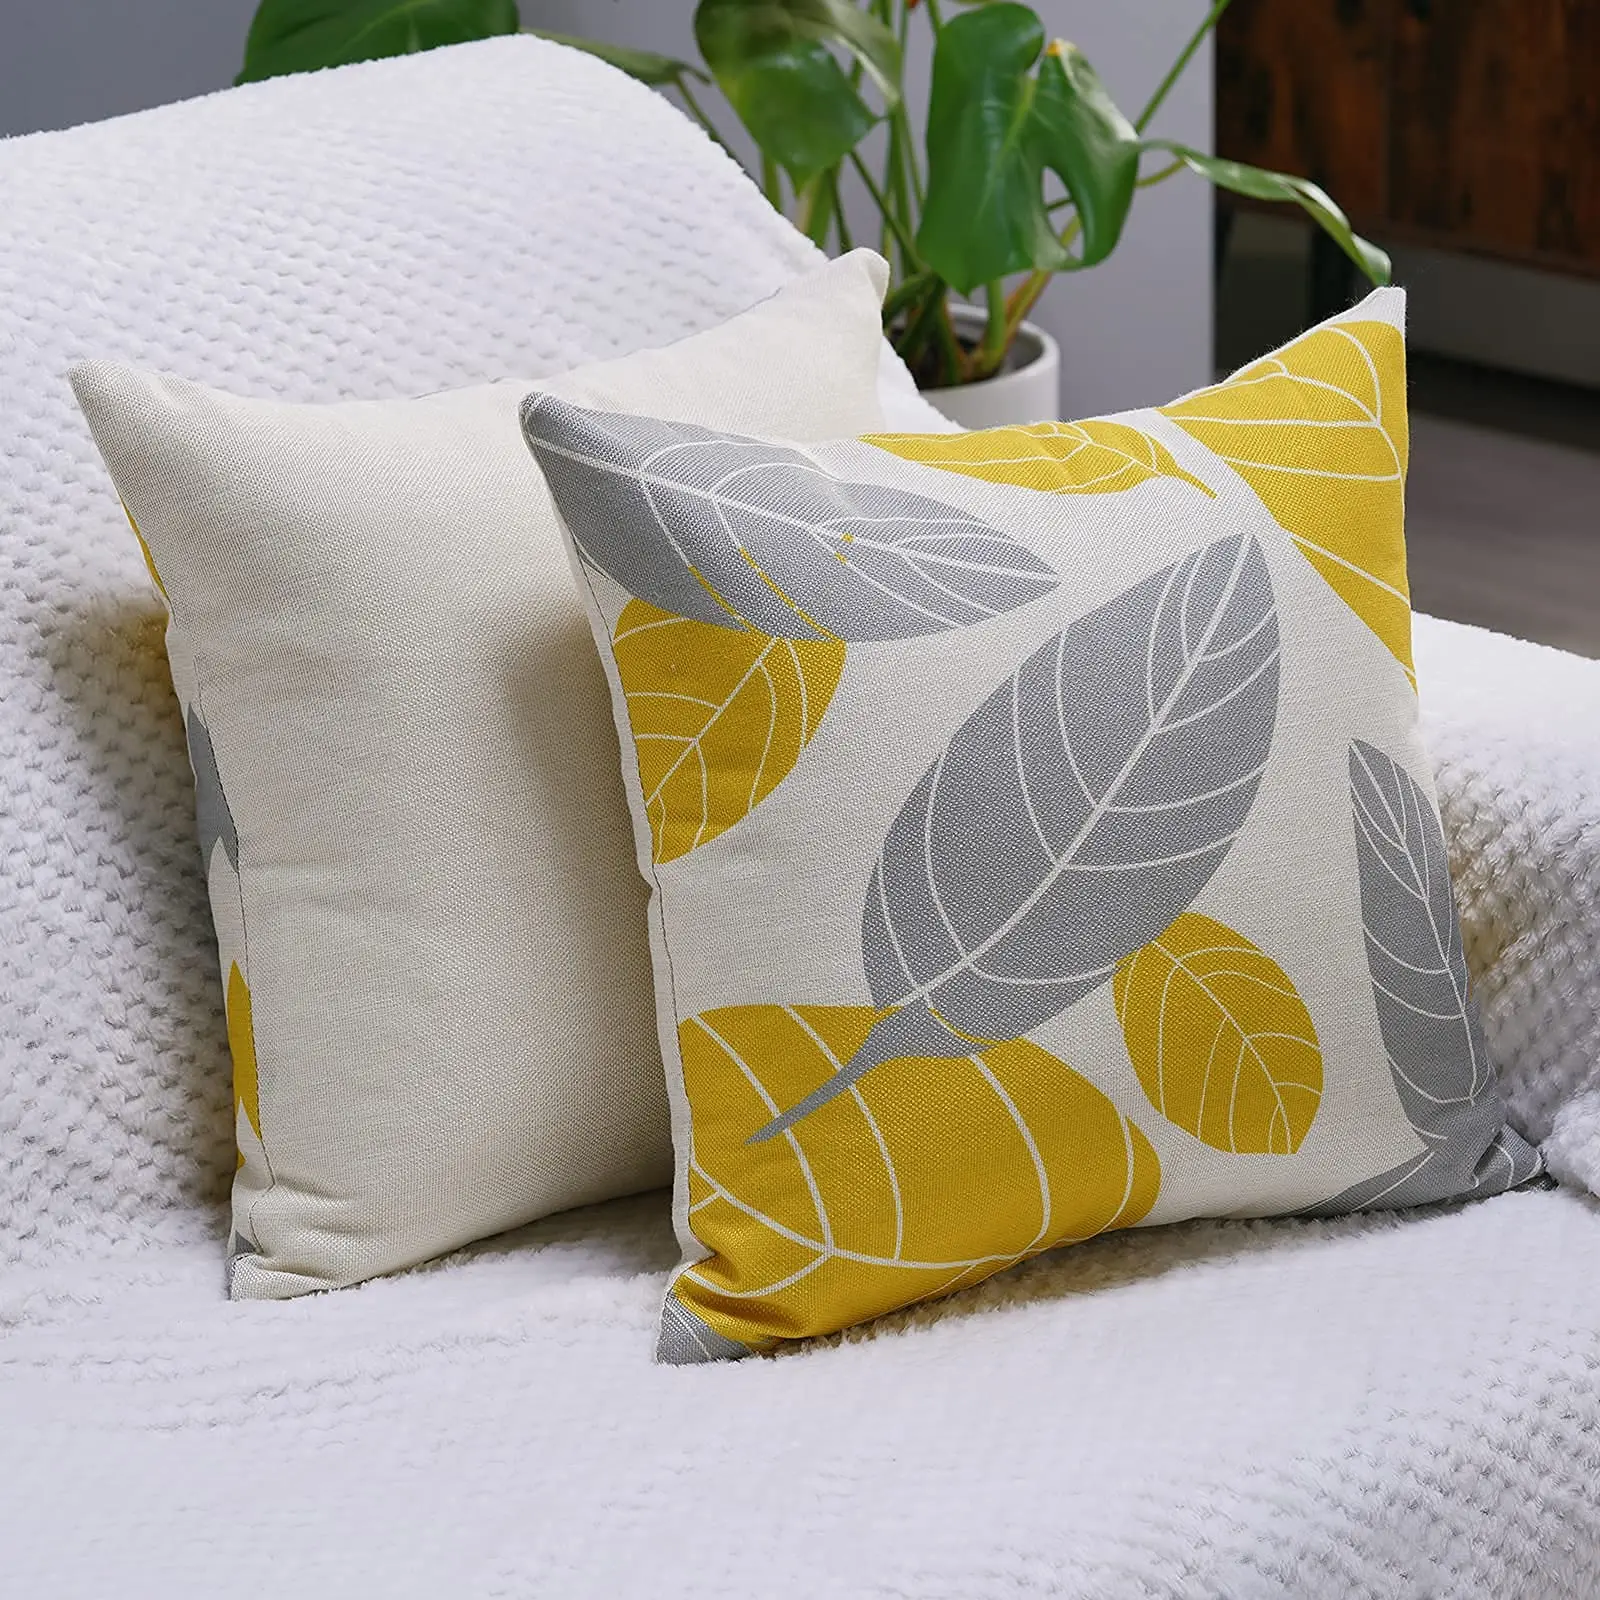 Nordic yellow gray geometric linen pillowcase sofa cushion cover home decoration can be customized for you 40x40 50x50 60x60